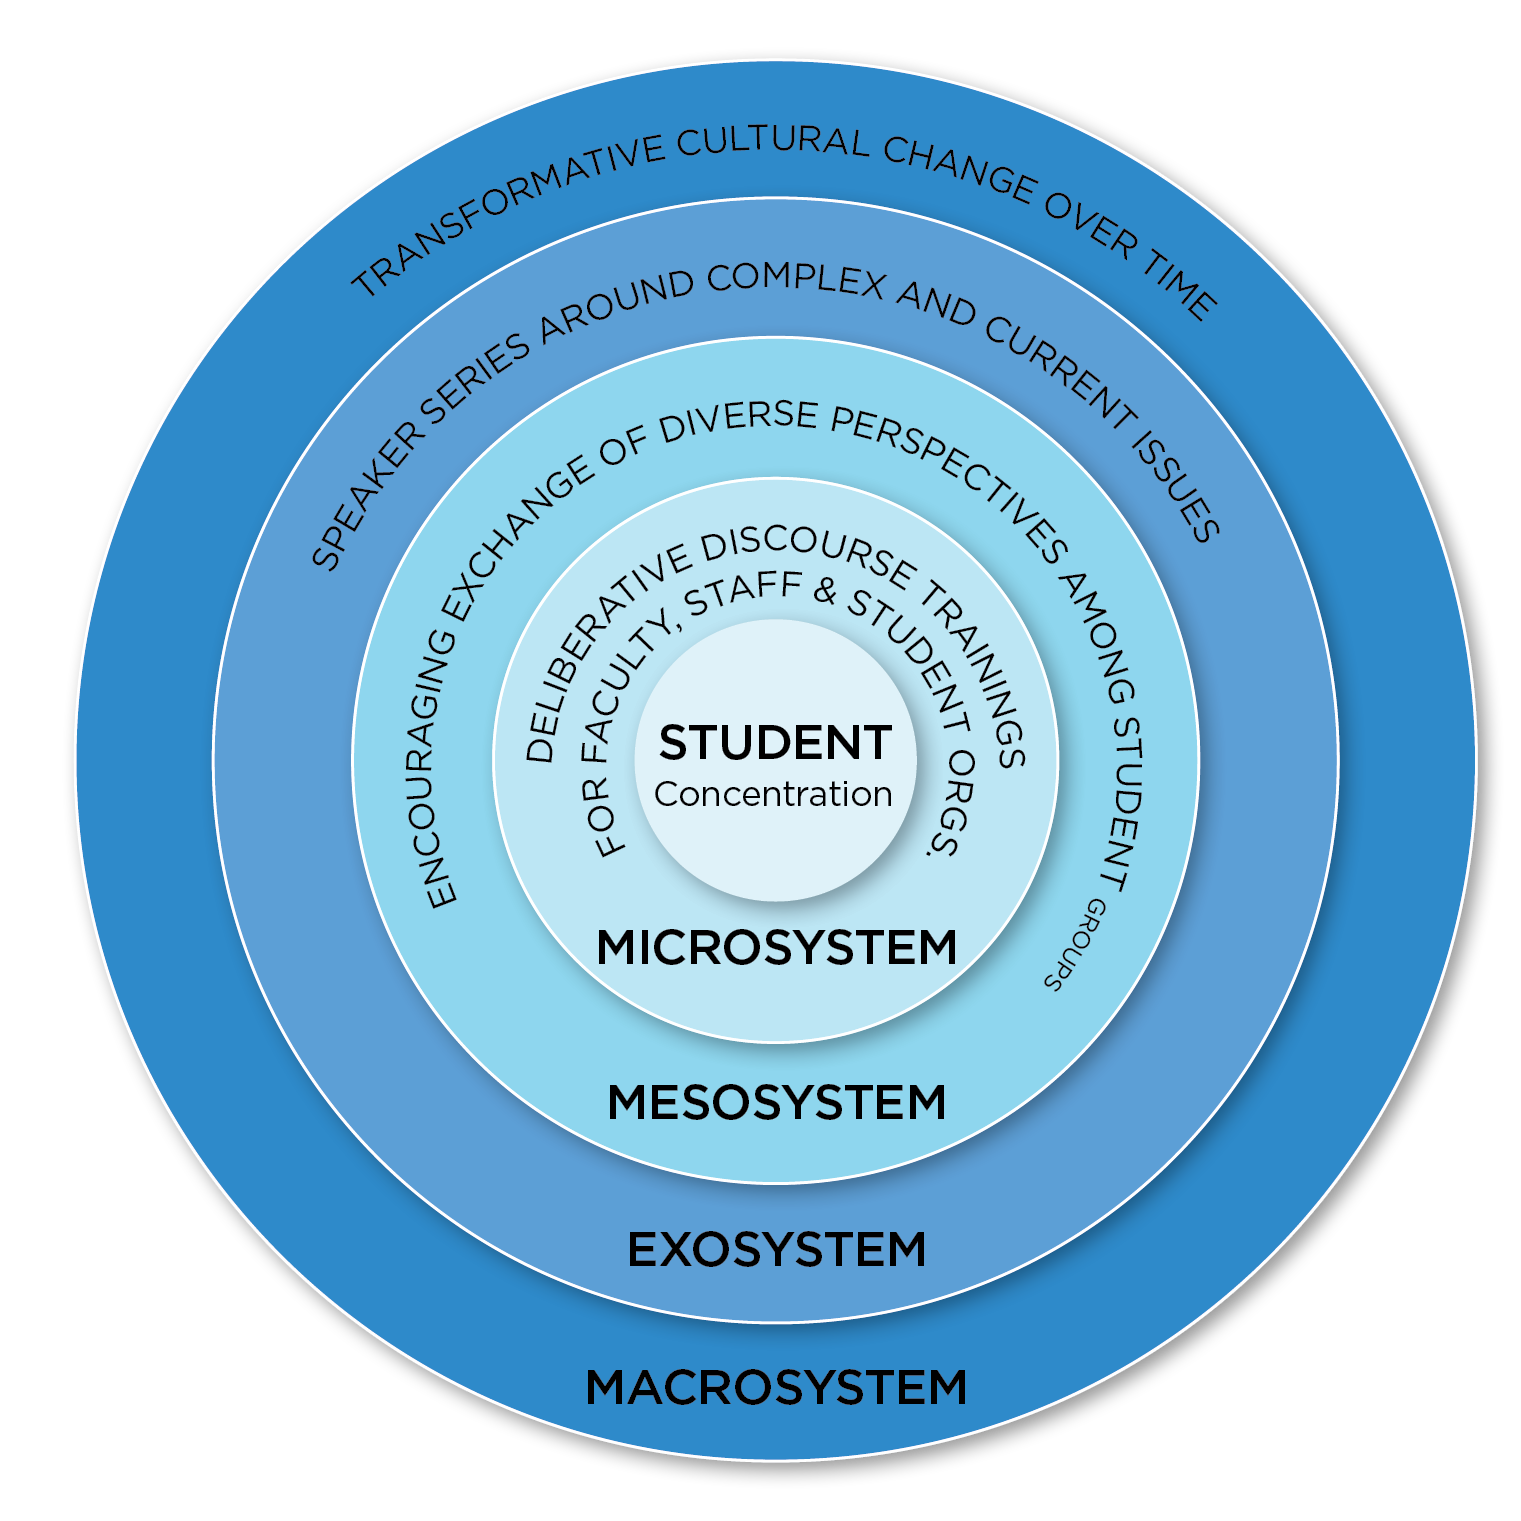 Concentric circles showing five levels of engagement, starting with students, then college and campus wide events, then interaction between groups of students, then college and campus-wide events, and finally cultural values on the outer level.